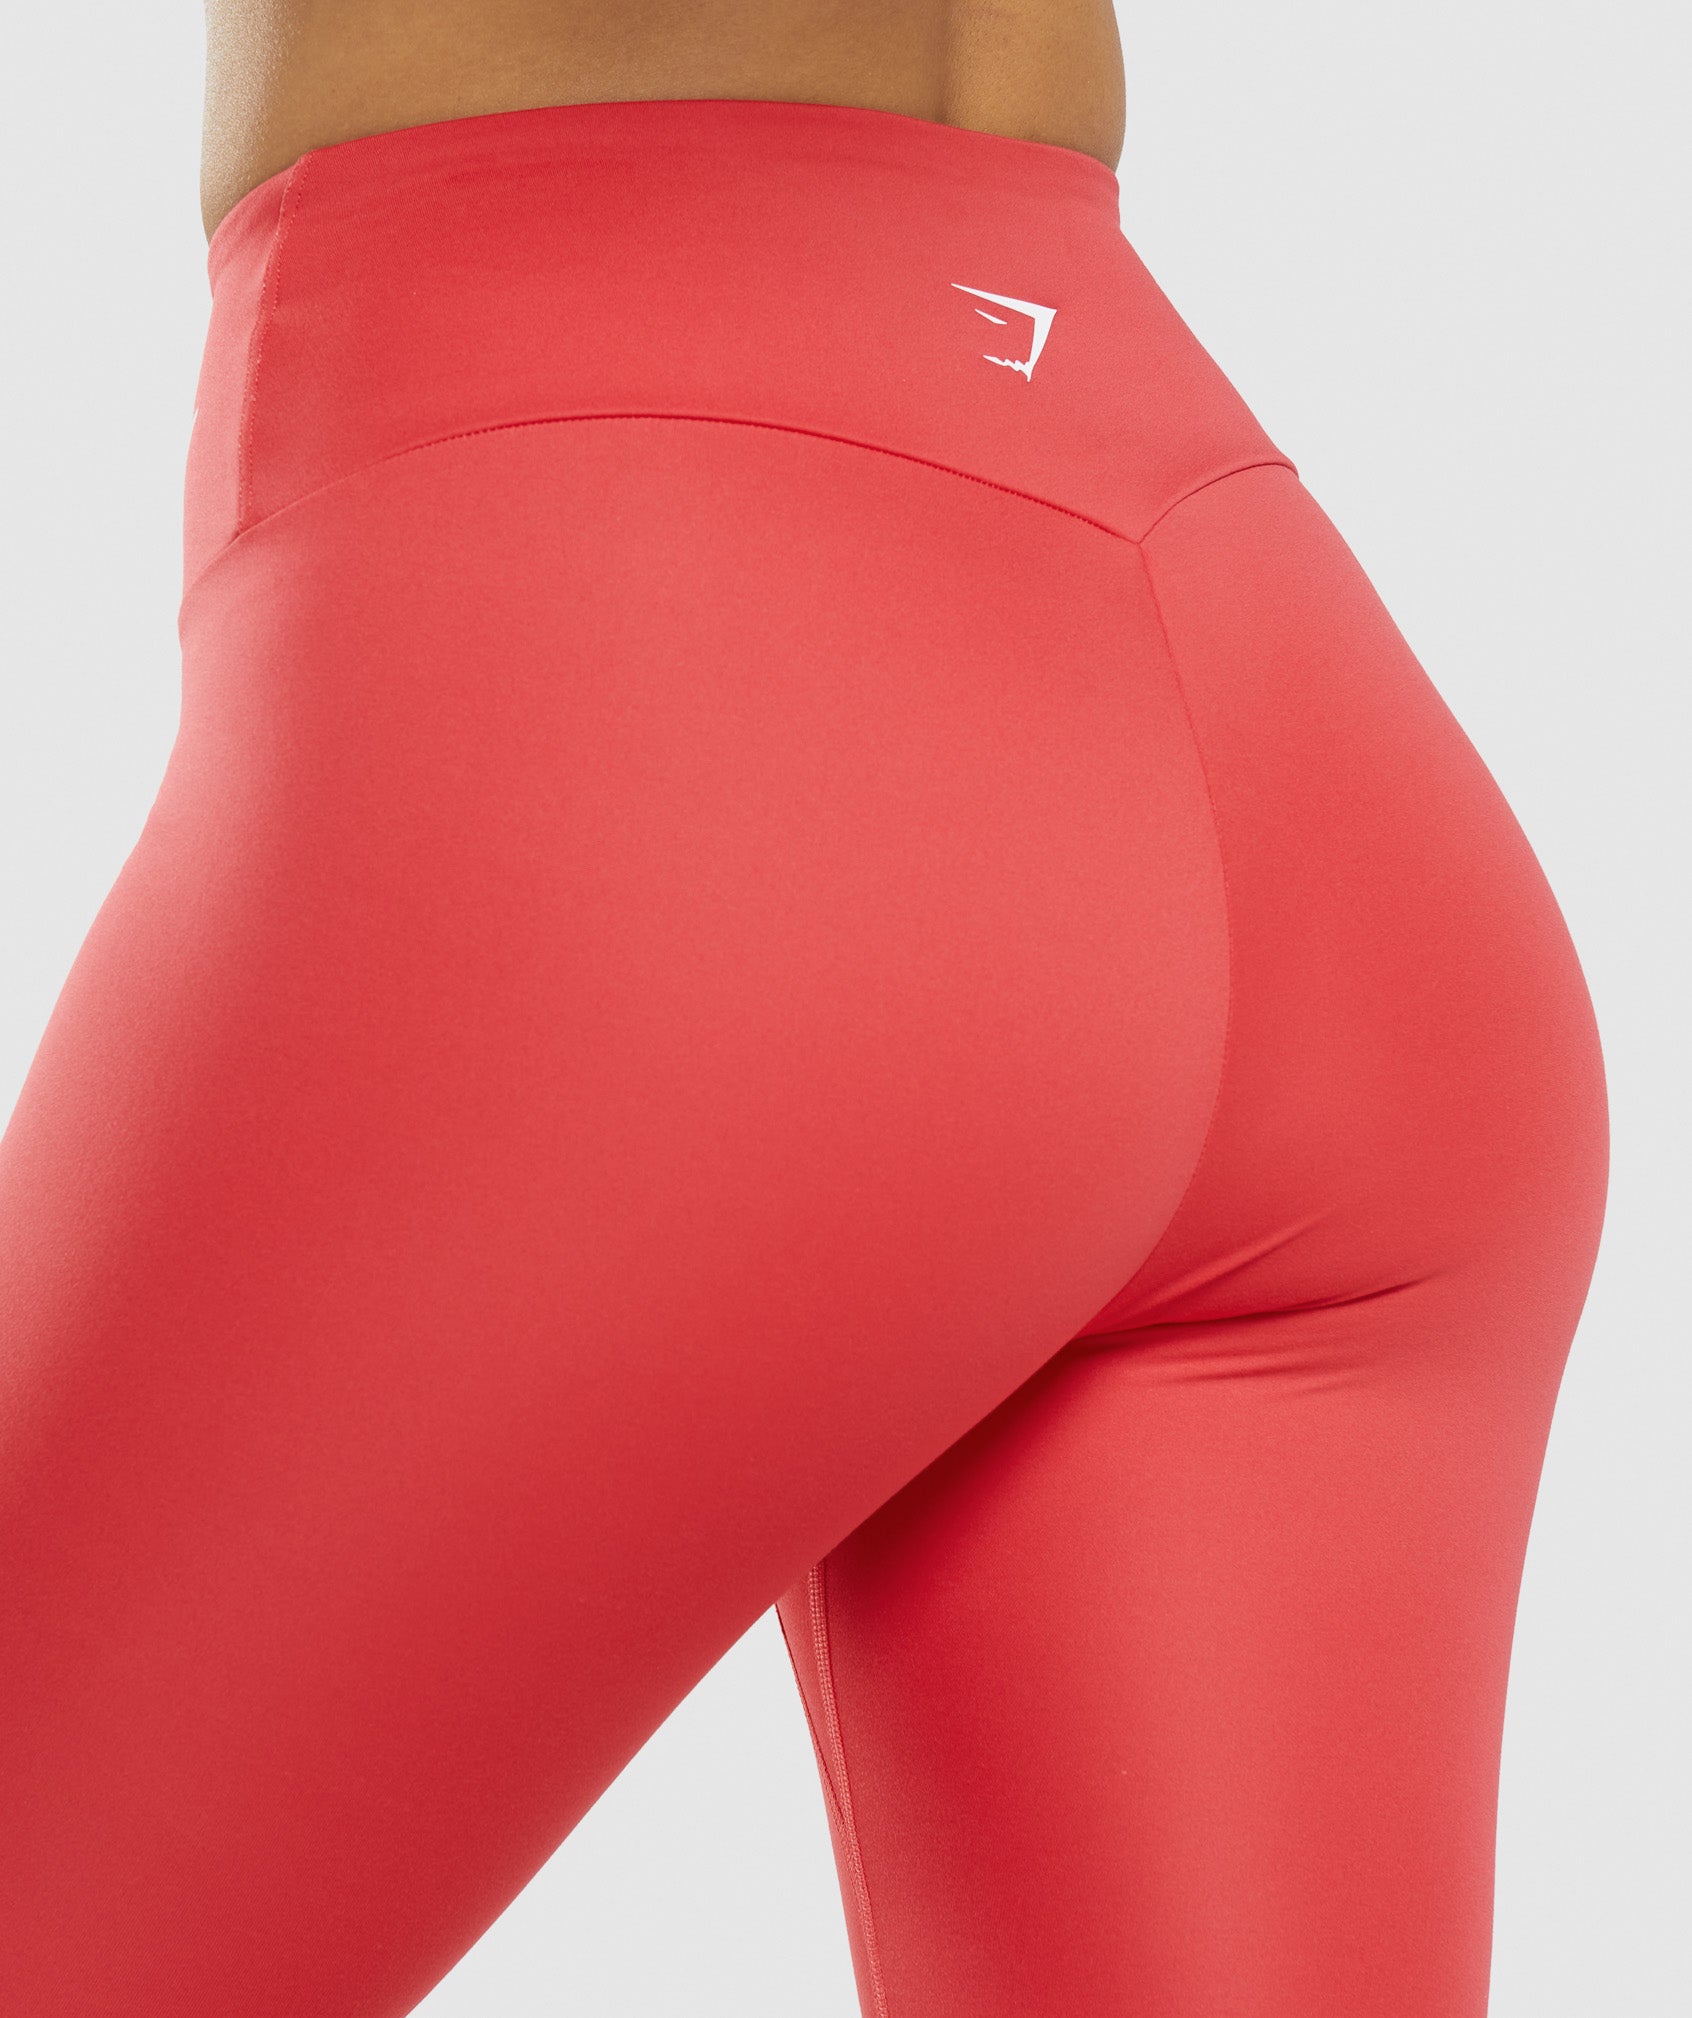 Training 7/8 Leggings in Ruby Red - view 5